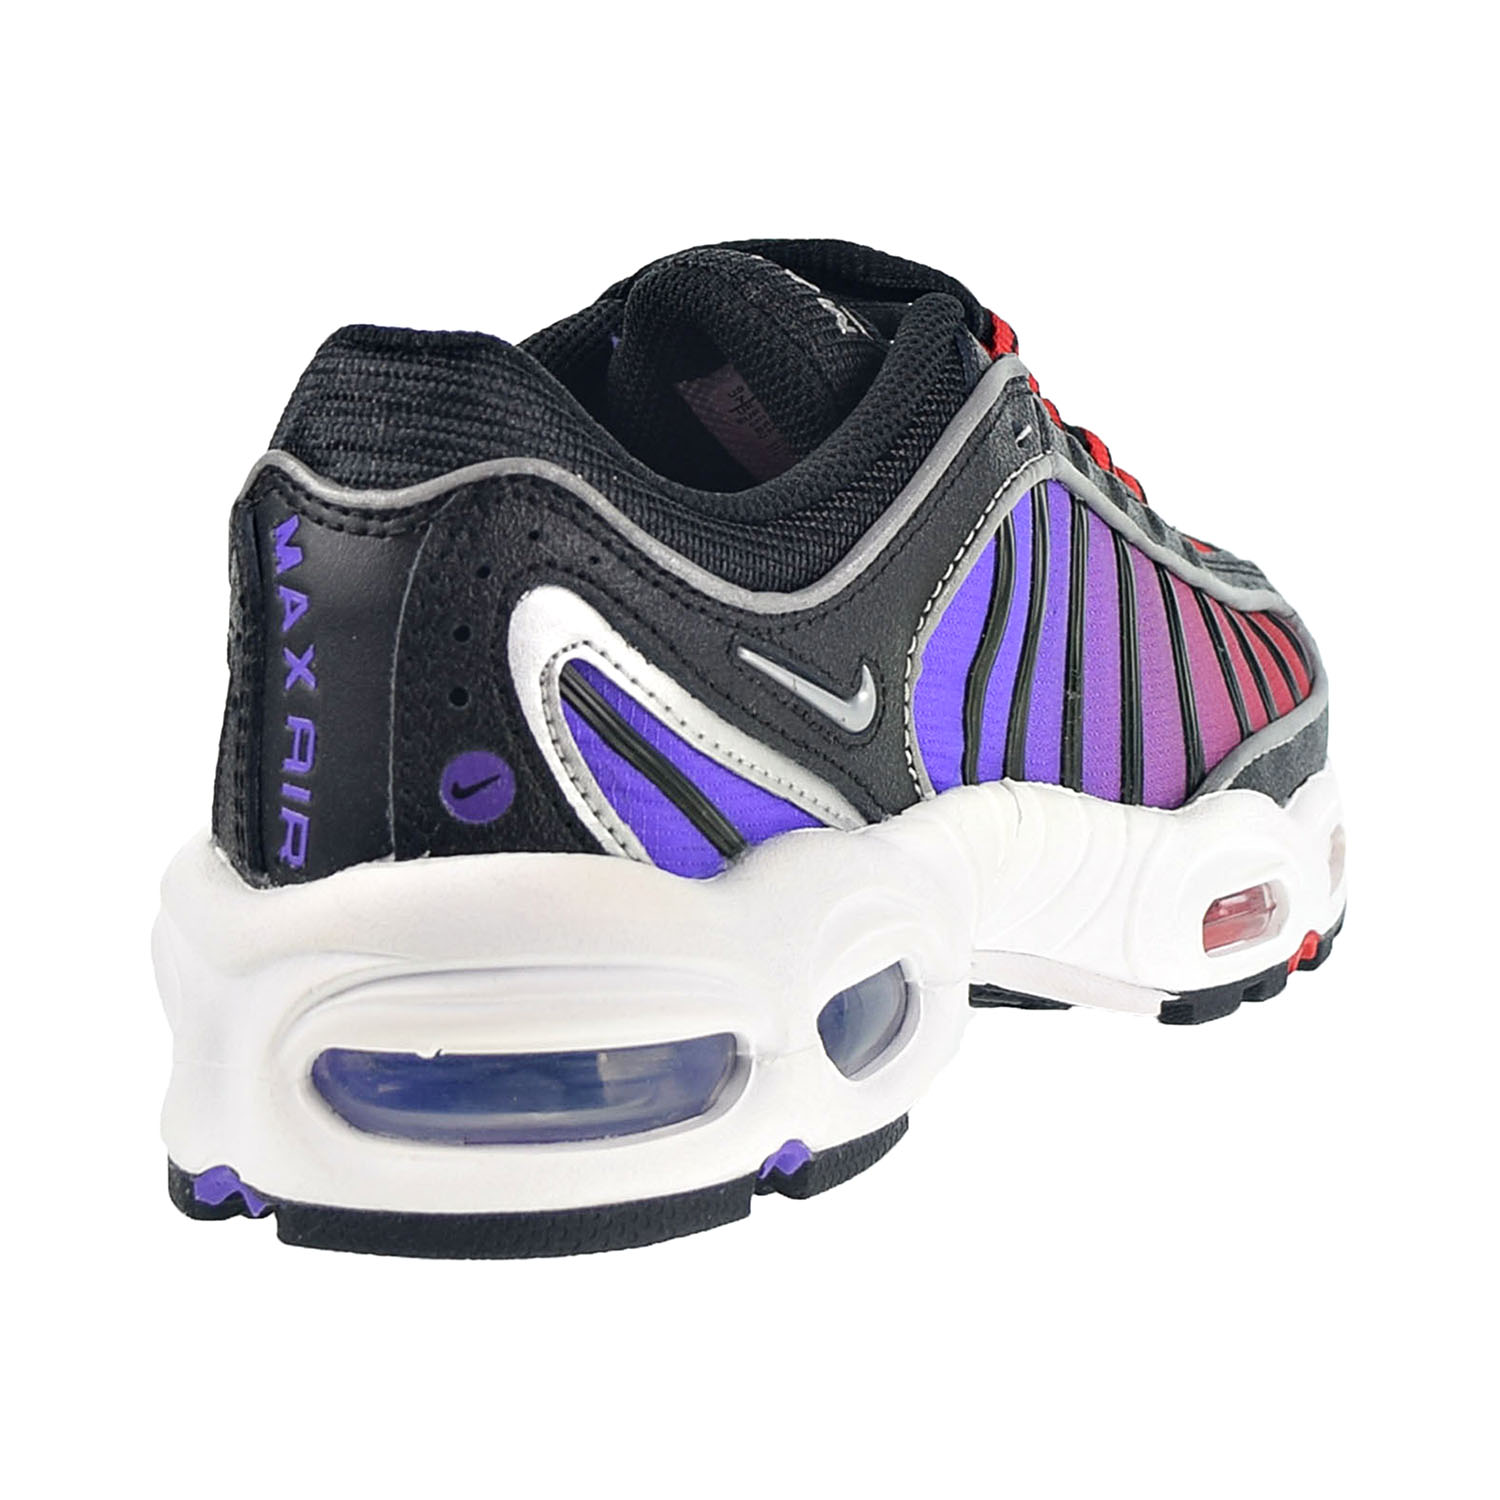 Nike Women's Air Max Tailwind IV Shoes Black-White-University Red-Psychic Purple cq9962-001 - image 3 of 6